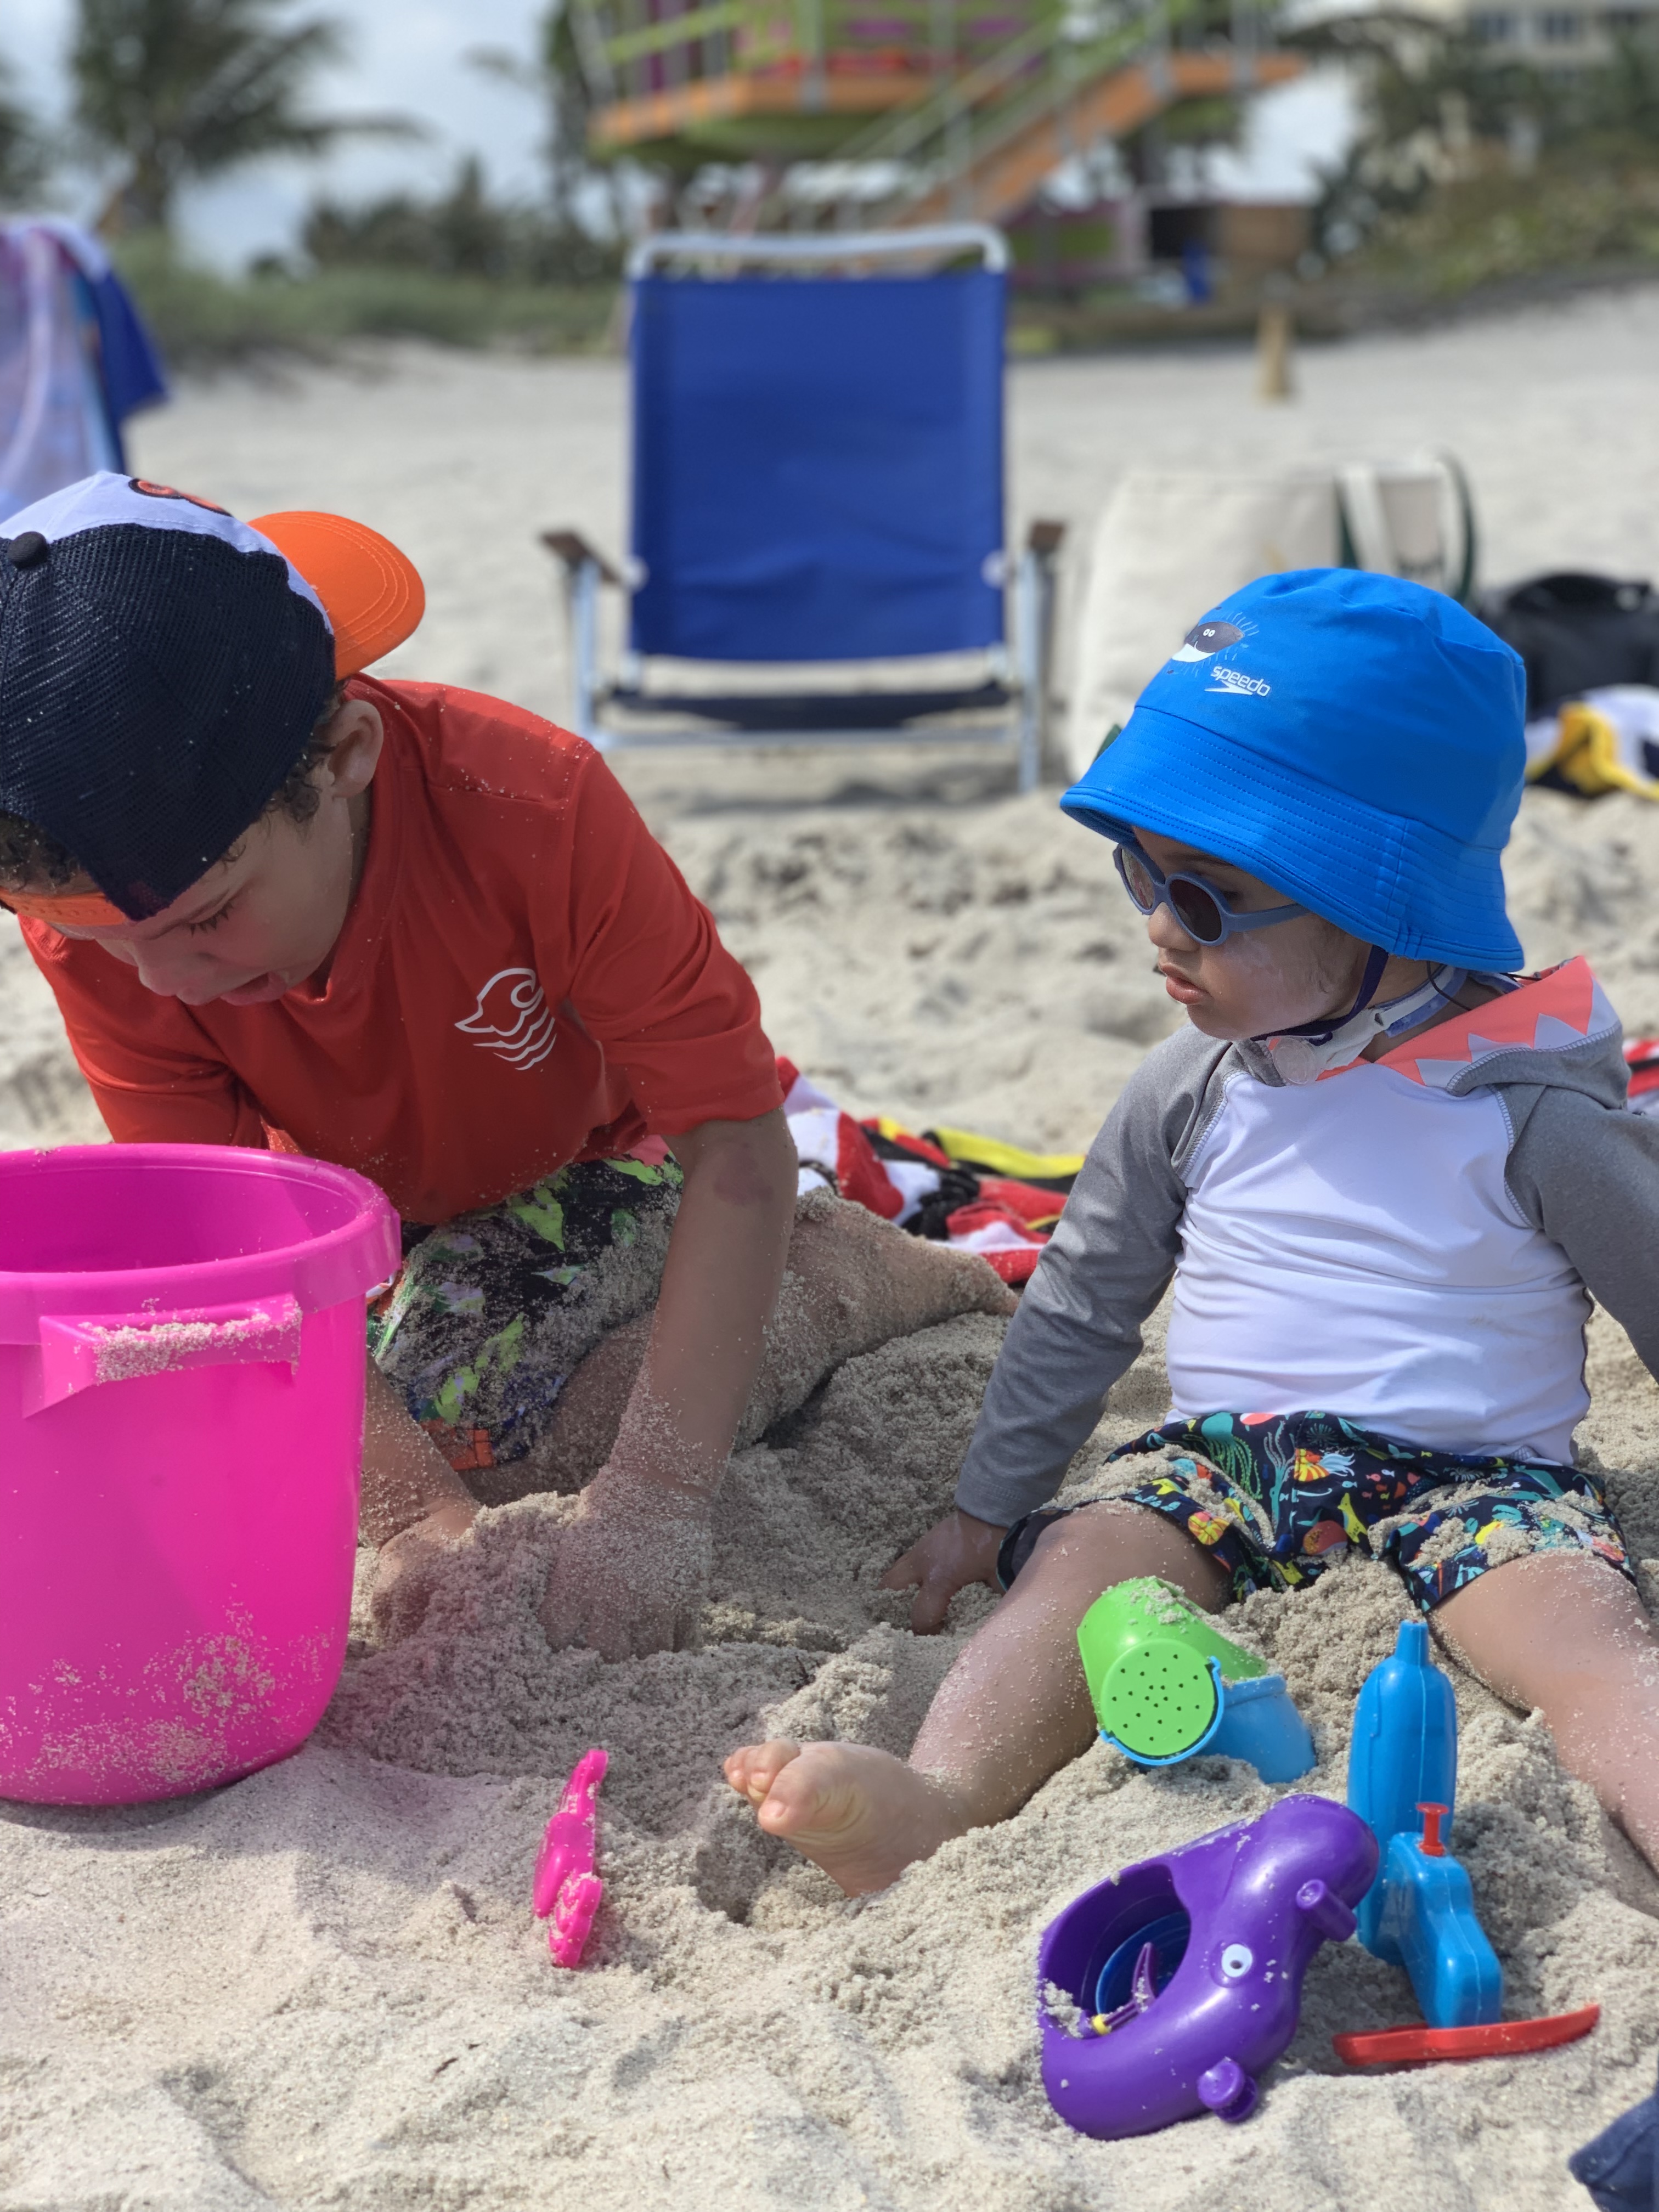 Jaxson and his brother play with toys in the sand at the beach.